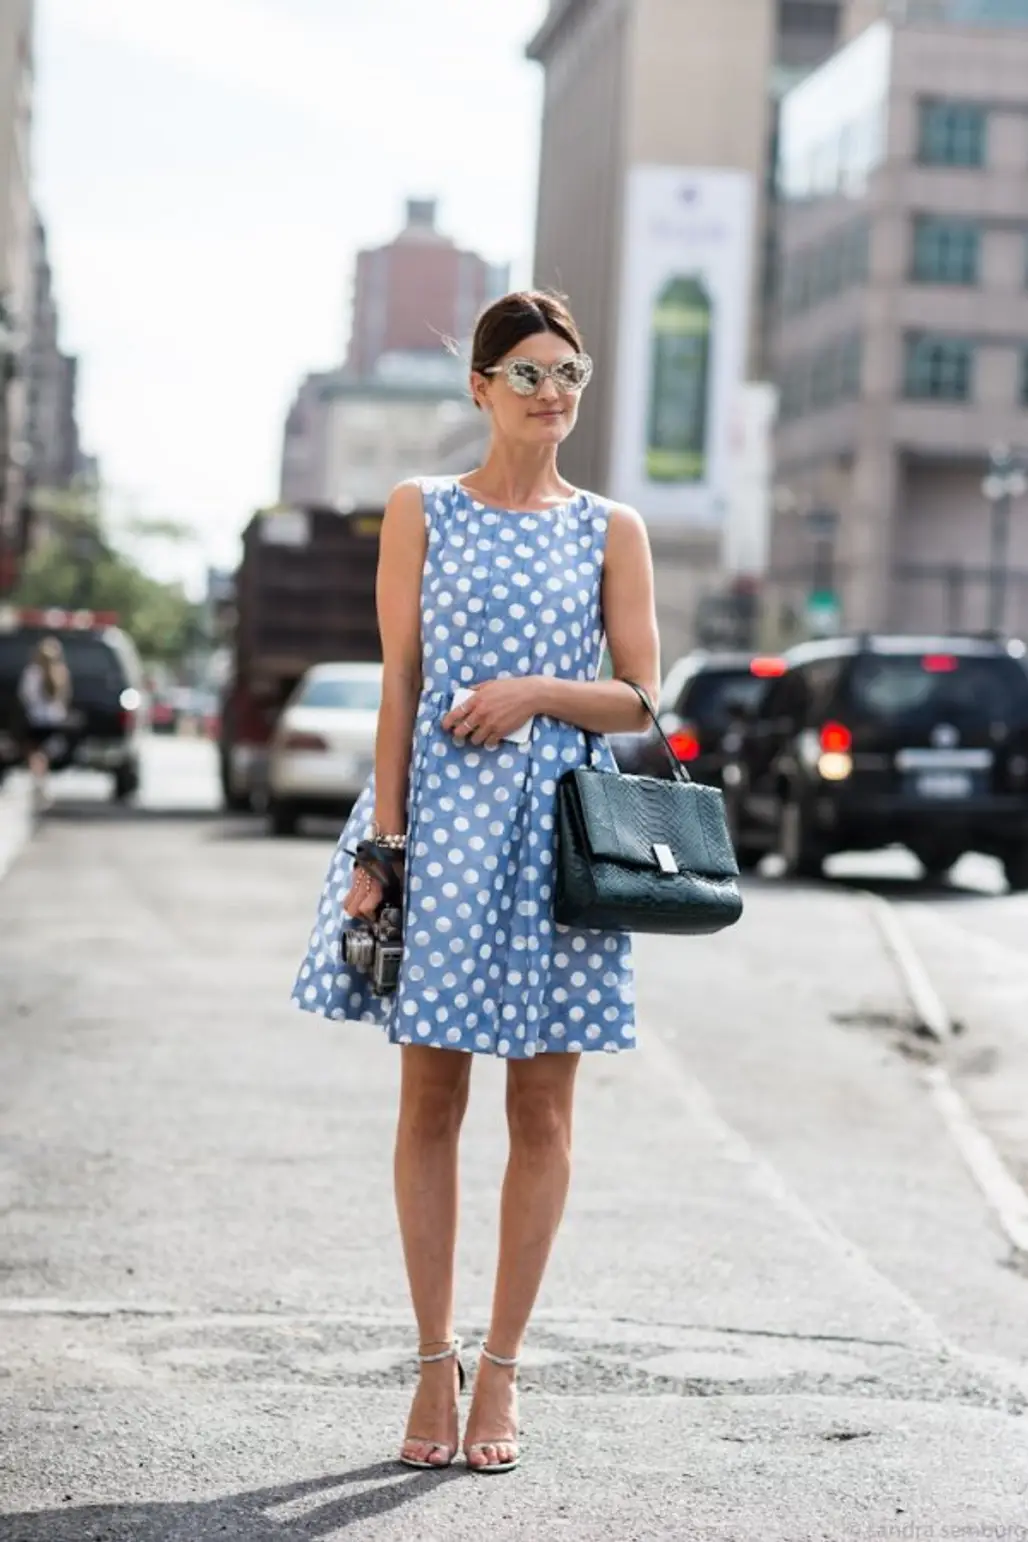 You Can’t Pass up Polka Dots or Pearls